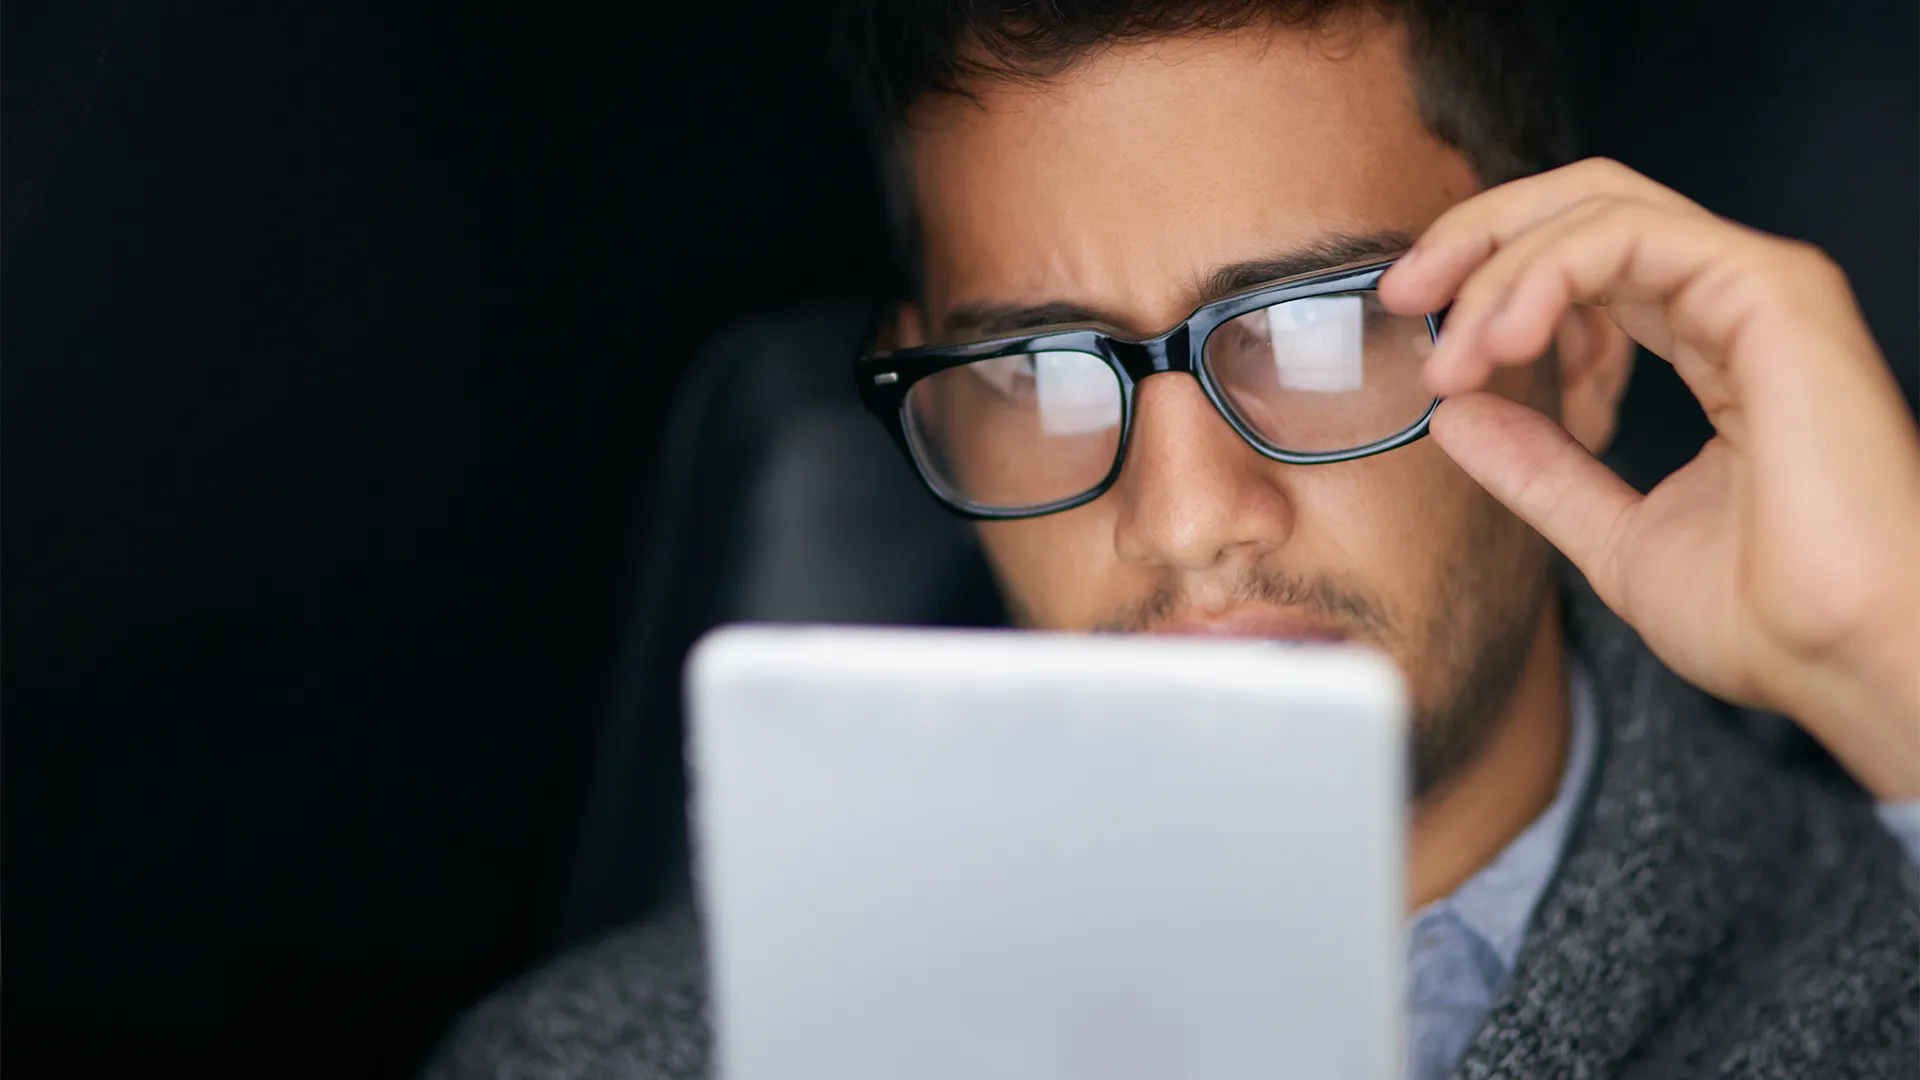 Practical Ways to Combat The Effects of Screen Time On Your Eyes